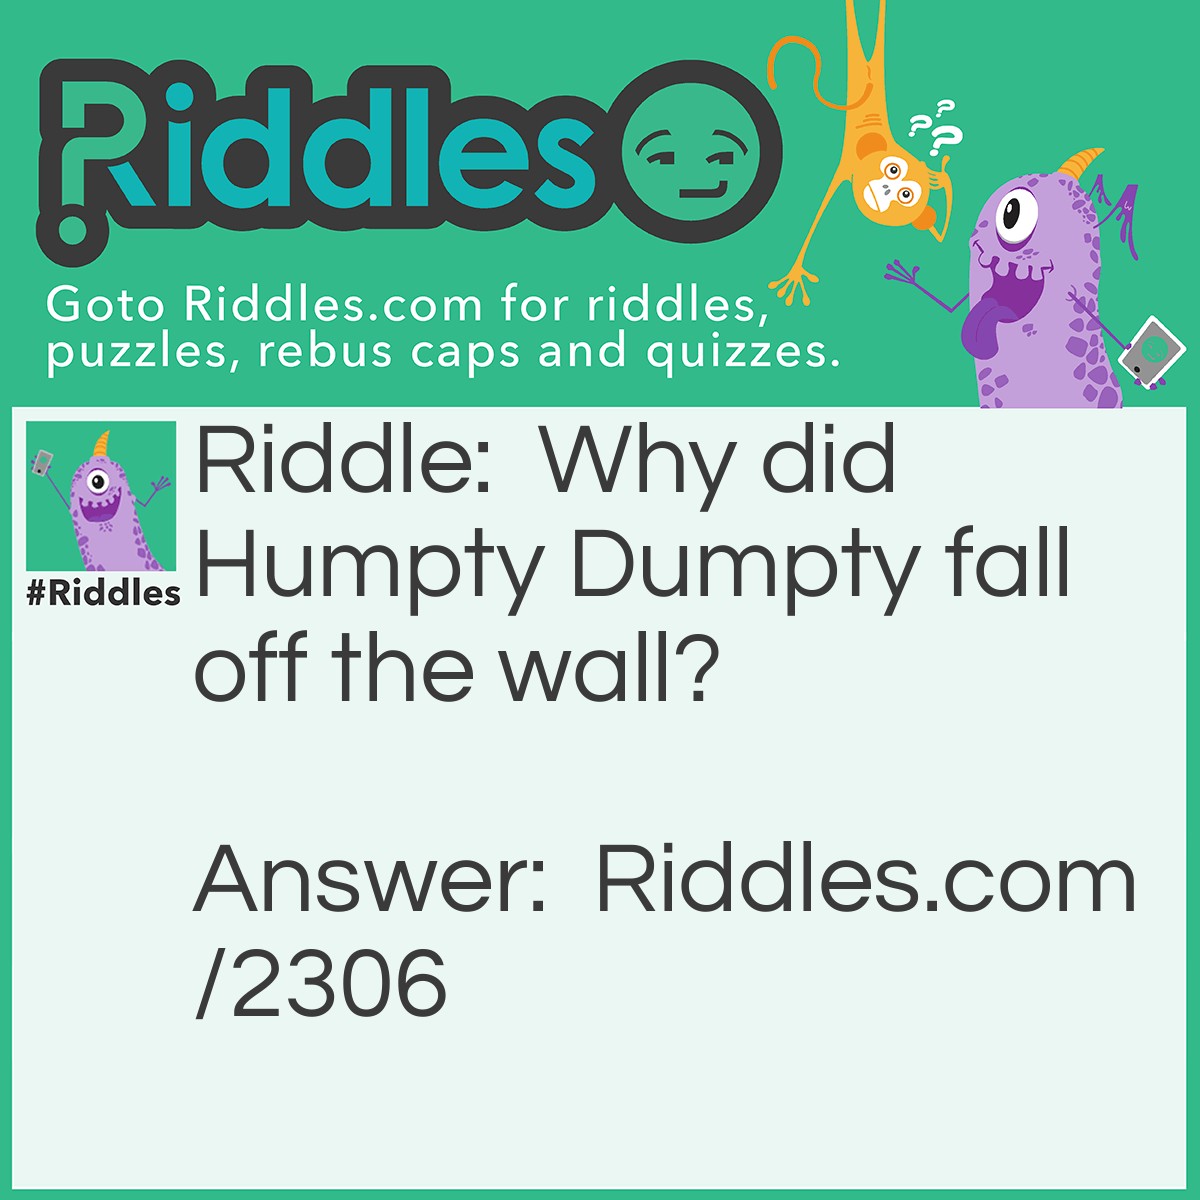 Riddle: Why did Humpty Dumpty fall off the wall? Answer: A Donald Trump supporter sucker punched him!